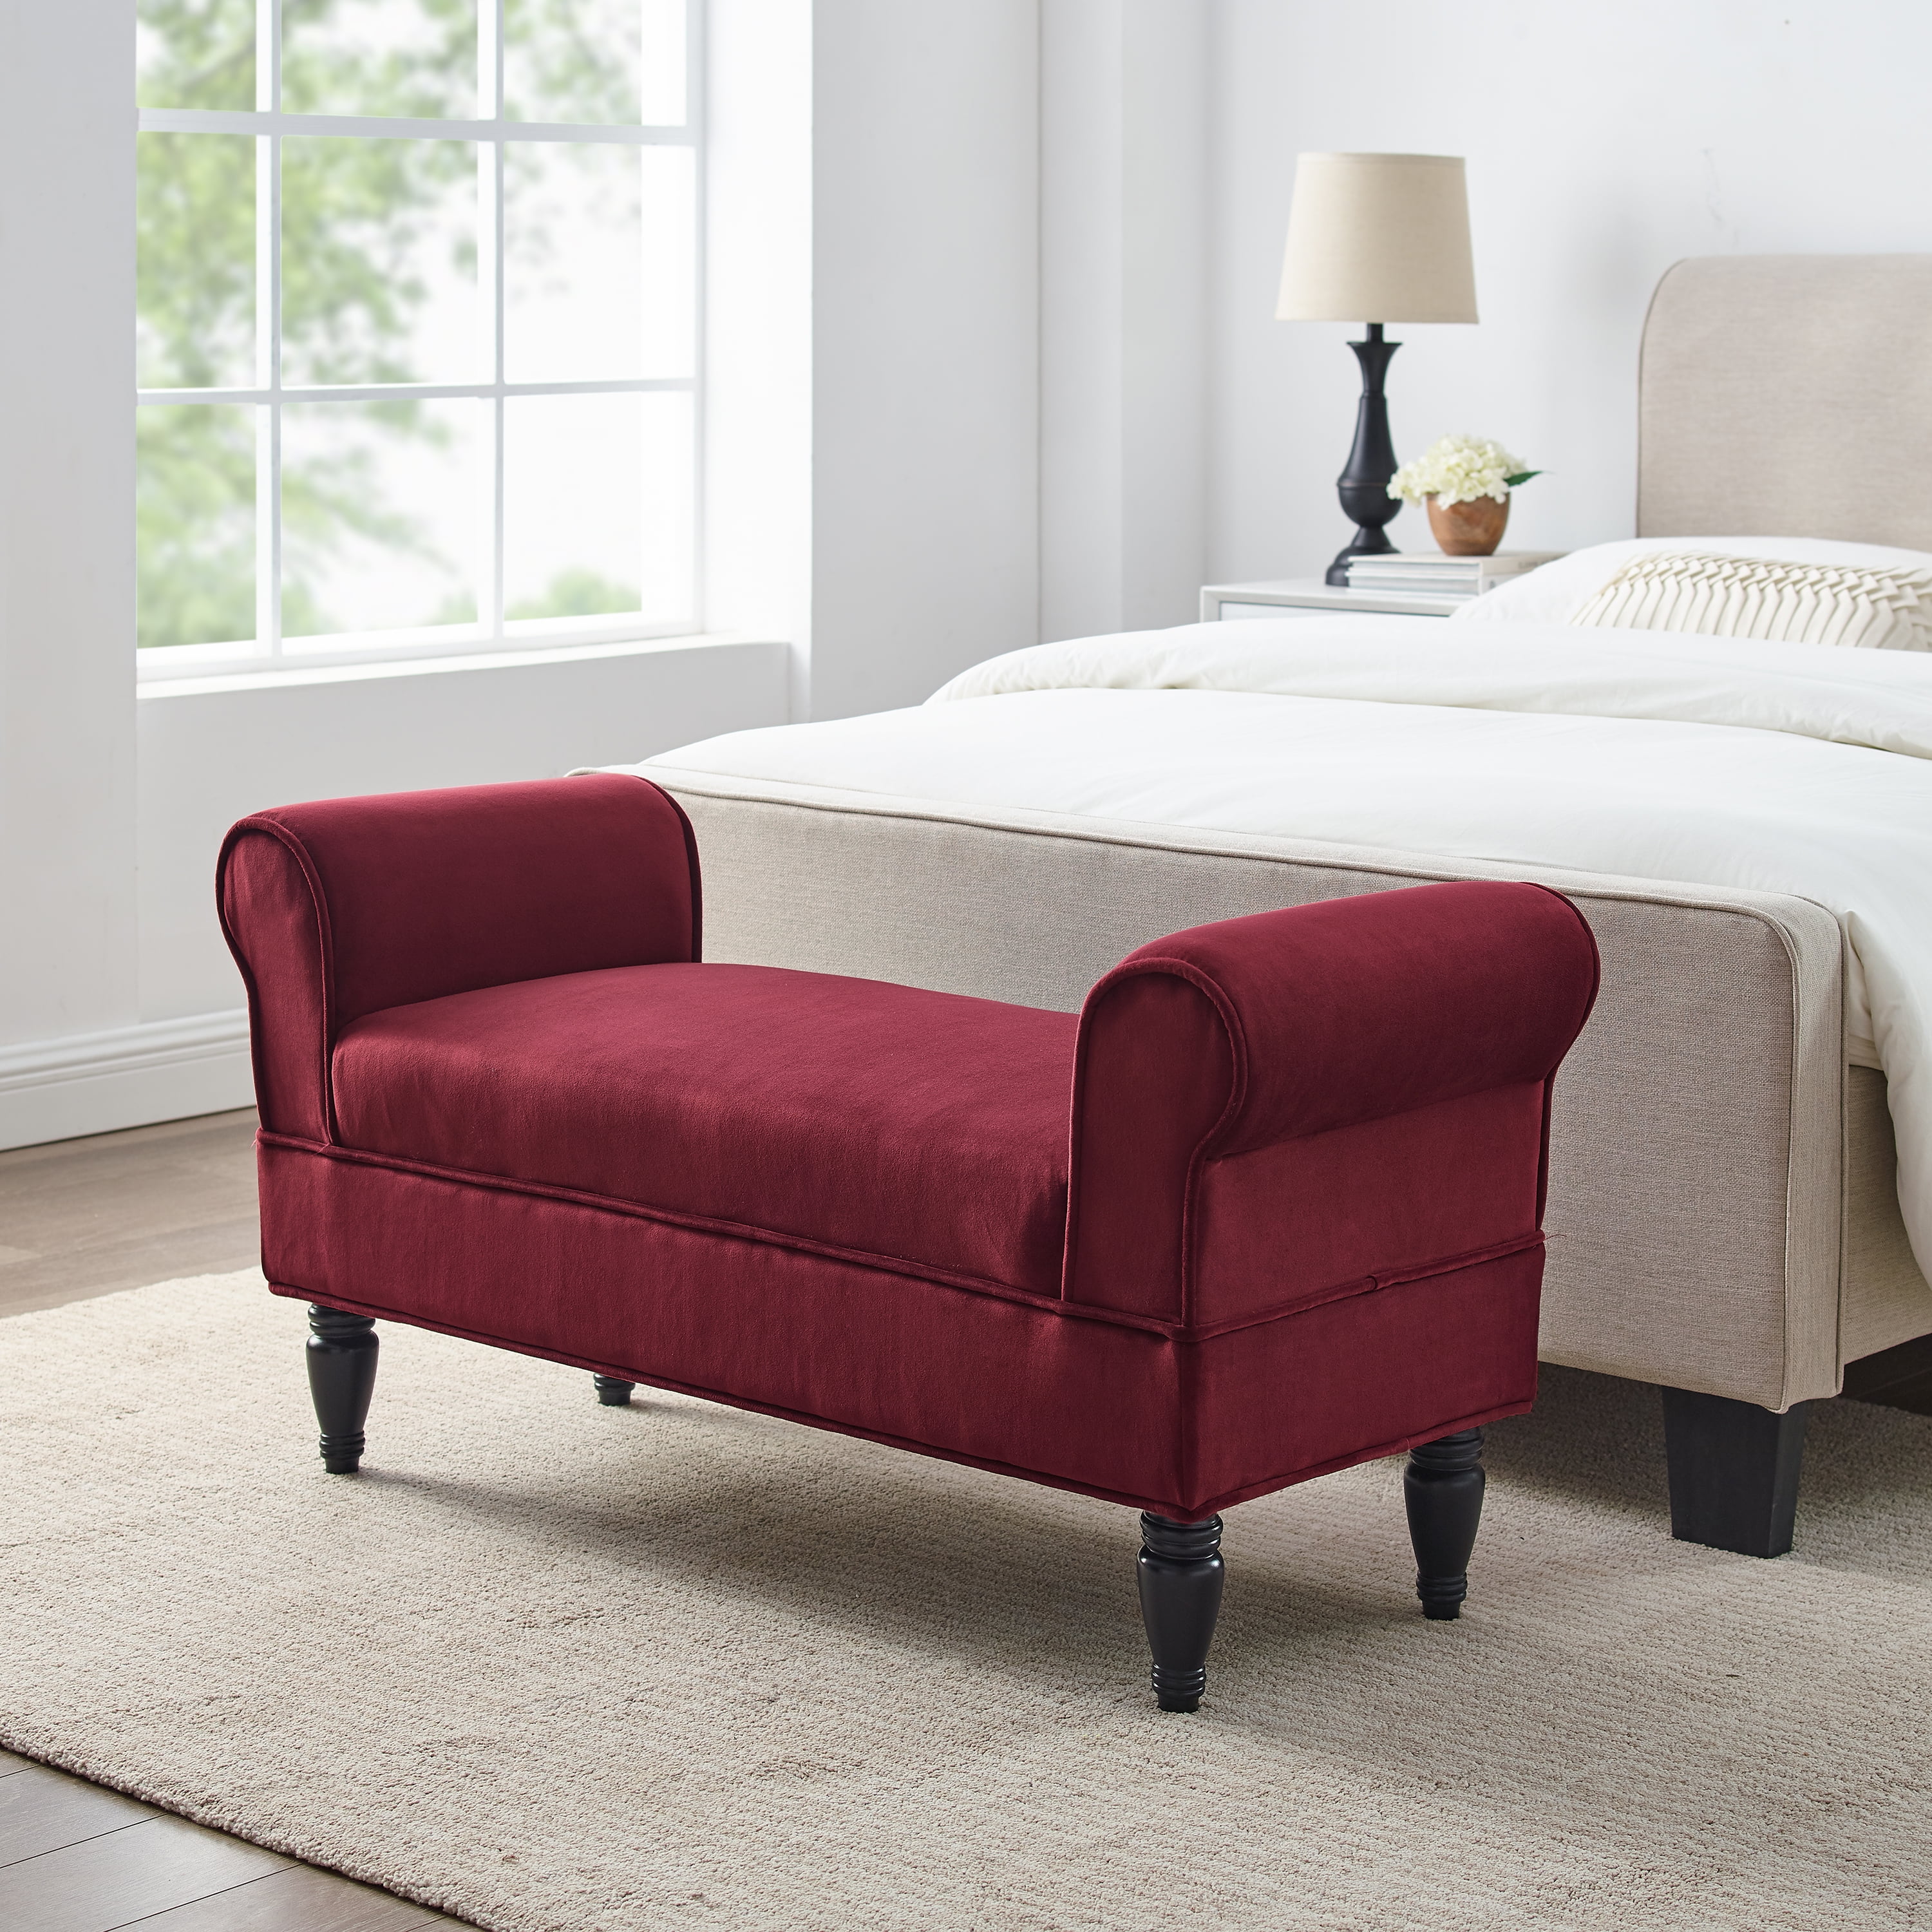 Linon Lillian Upholstered Bench Berry, Storage Bench With Arms For Bedroom